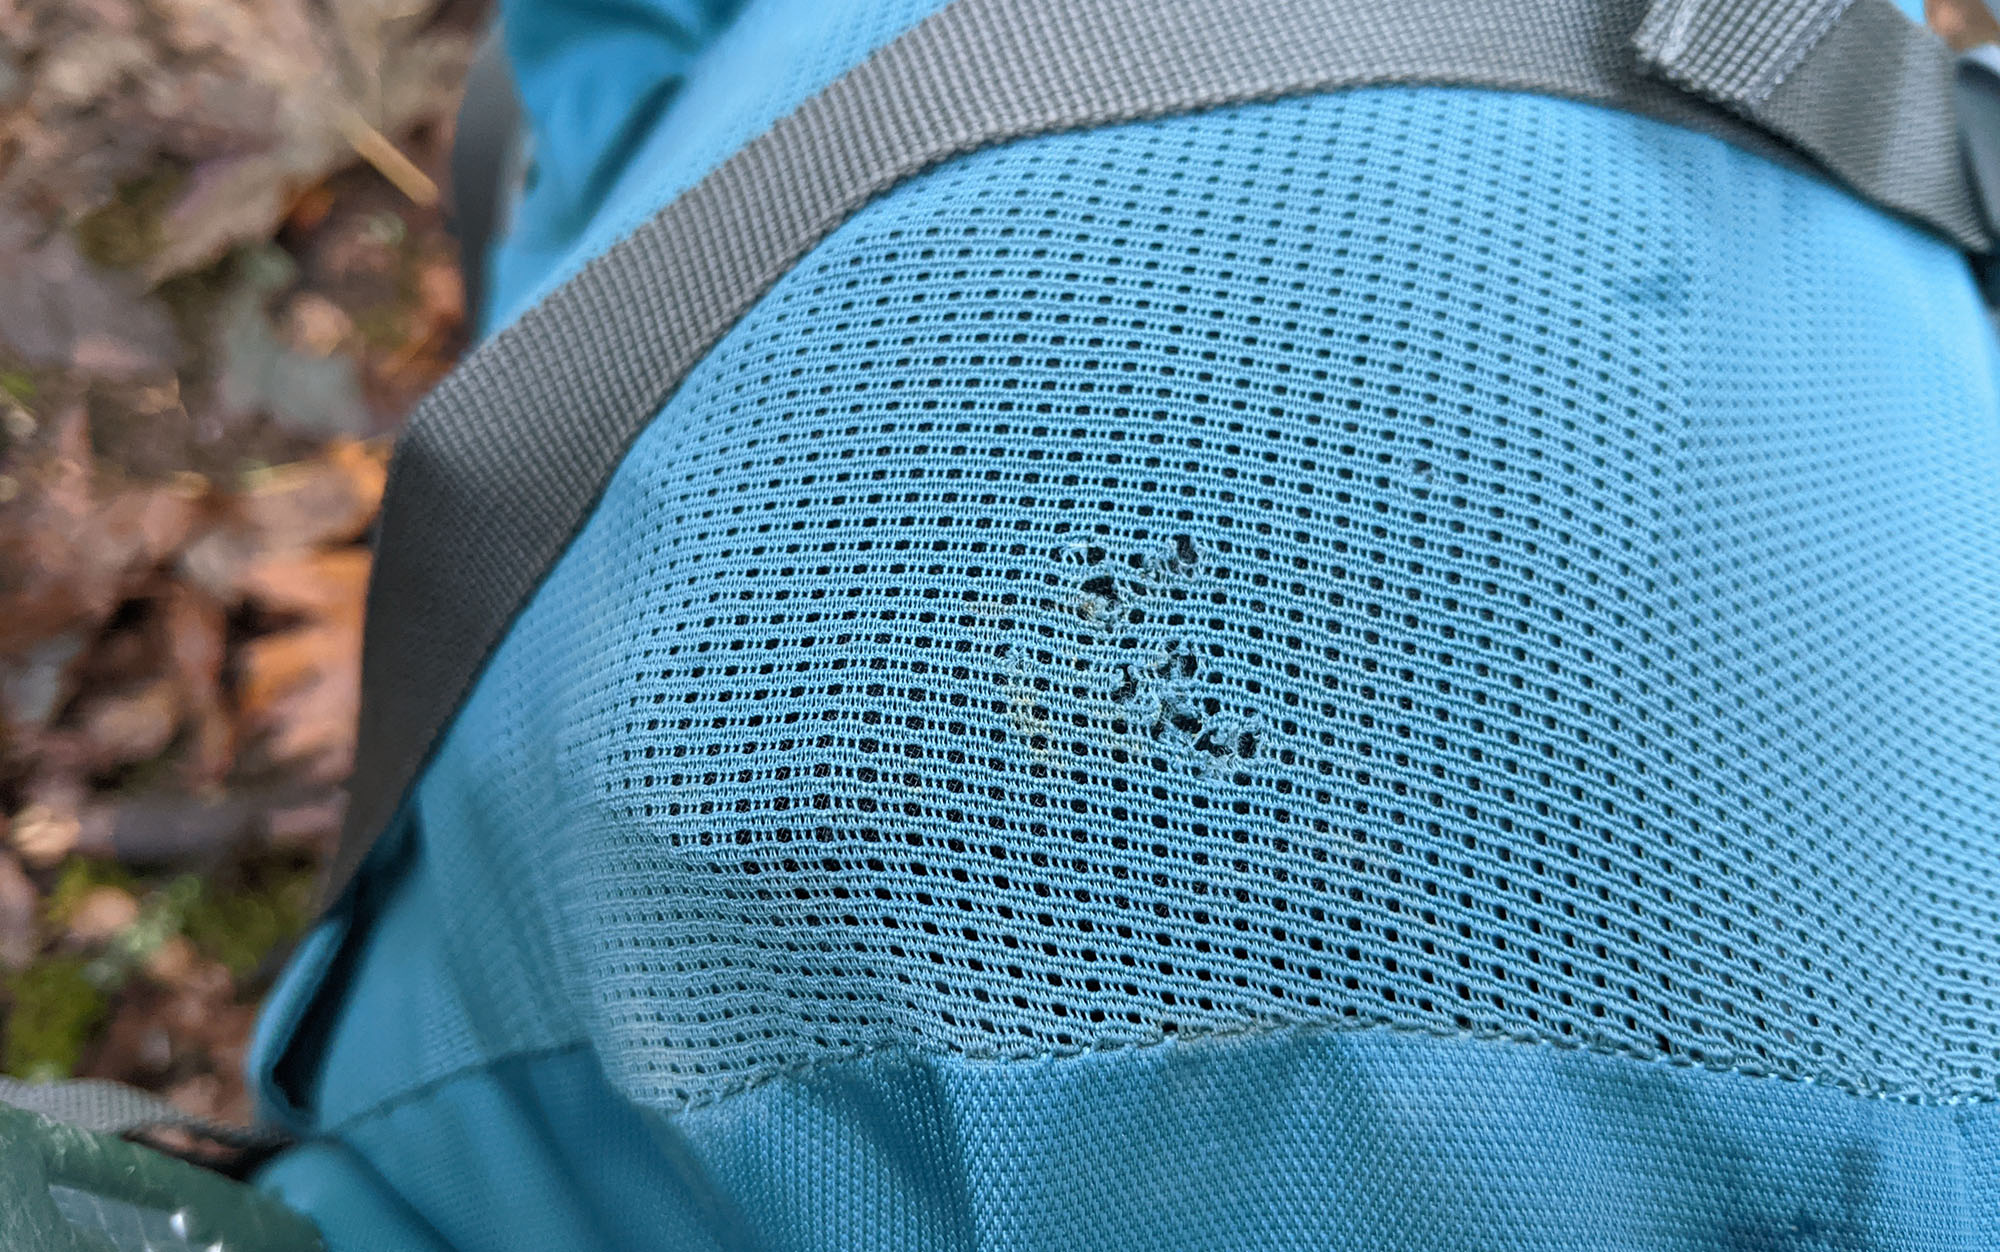 There is wear on the Coyote's mesh pockets.